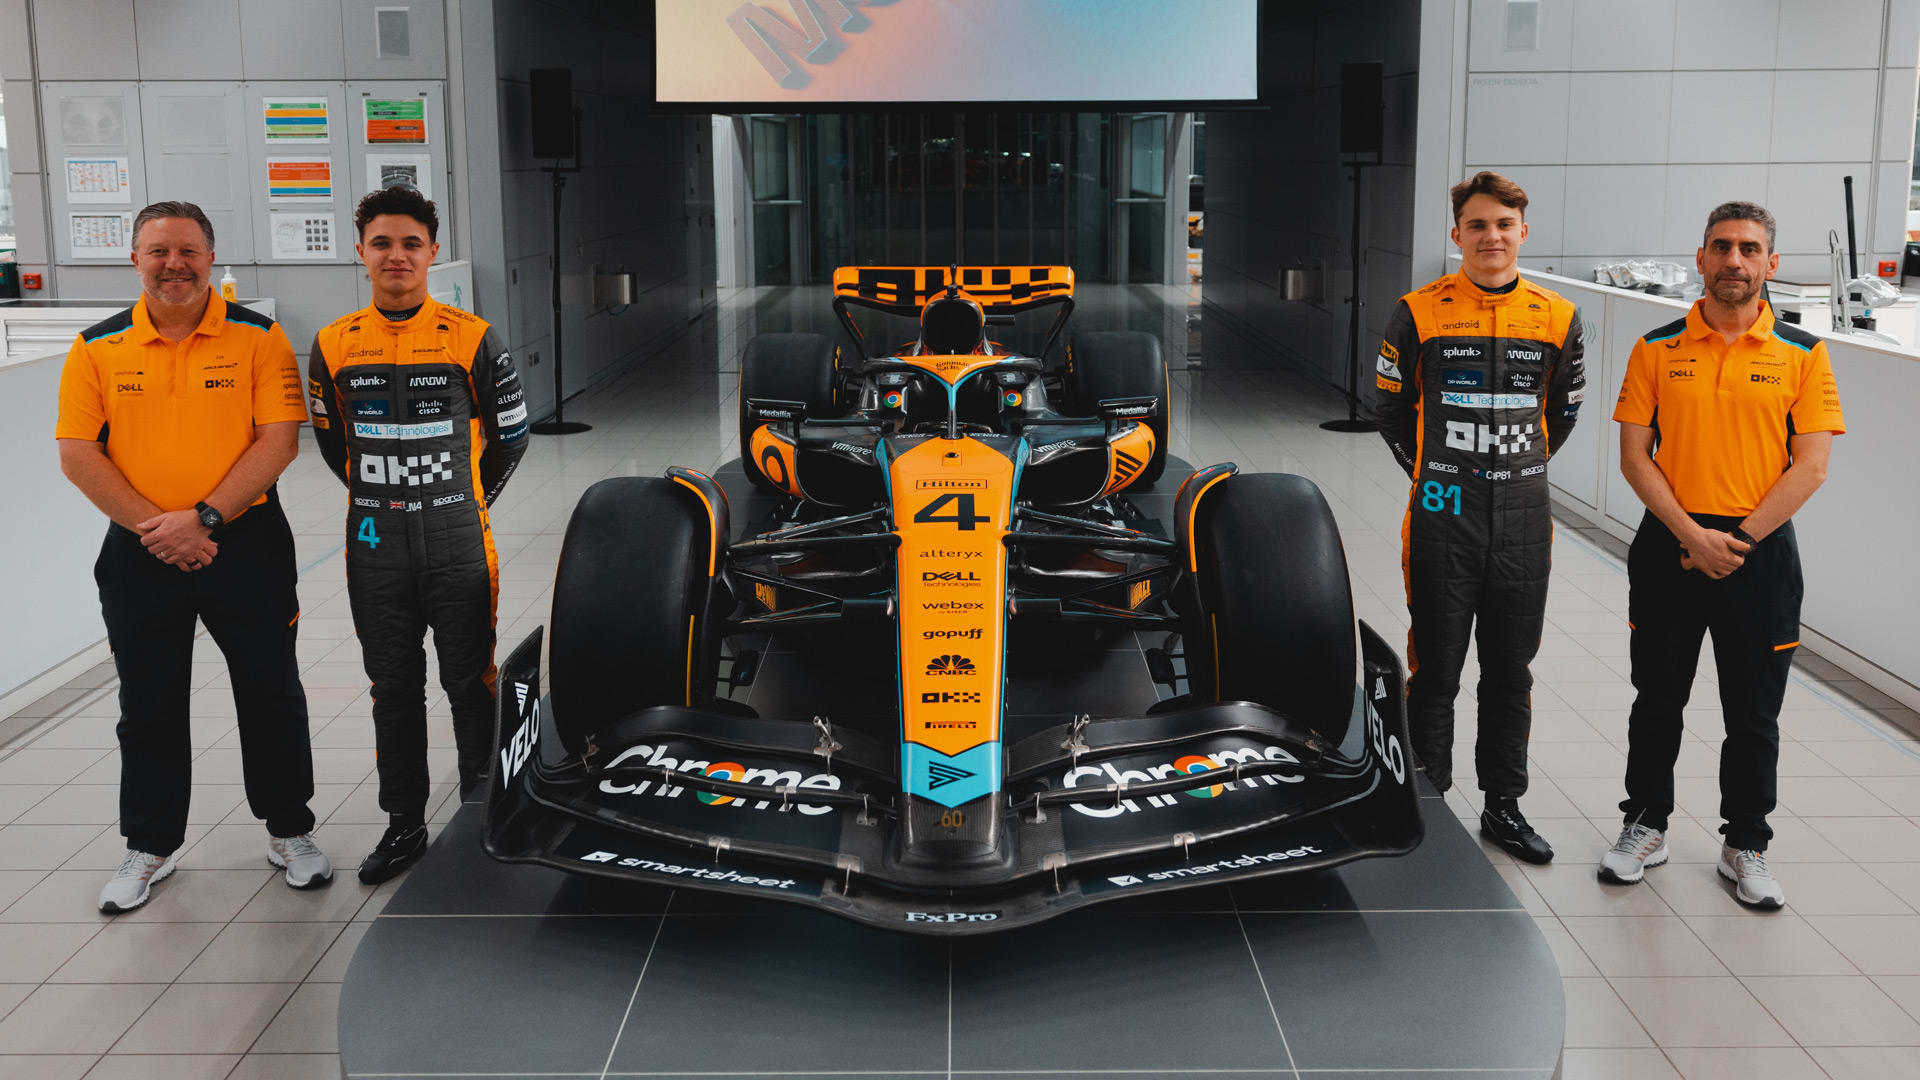 The sixth 2023 challenger to be revealed! #F1 @McLarenF1 ... Tweet From Marvel